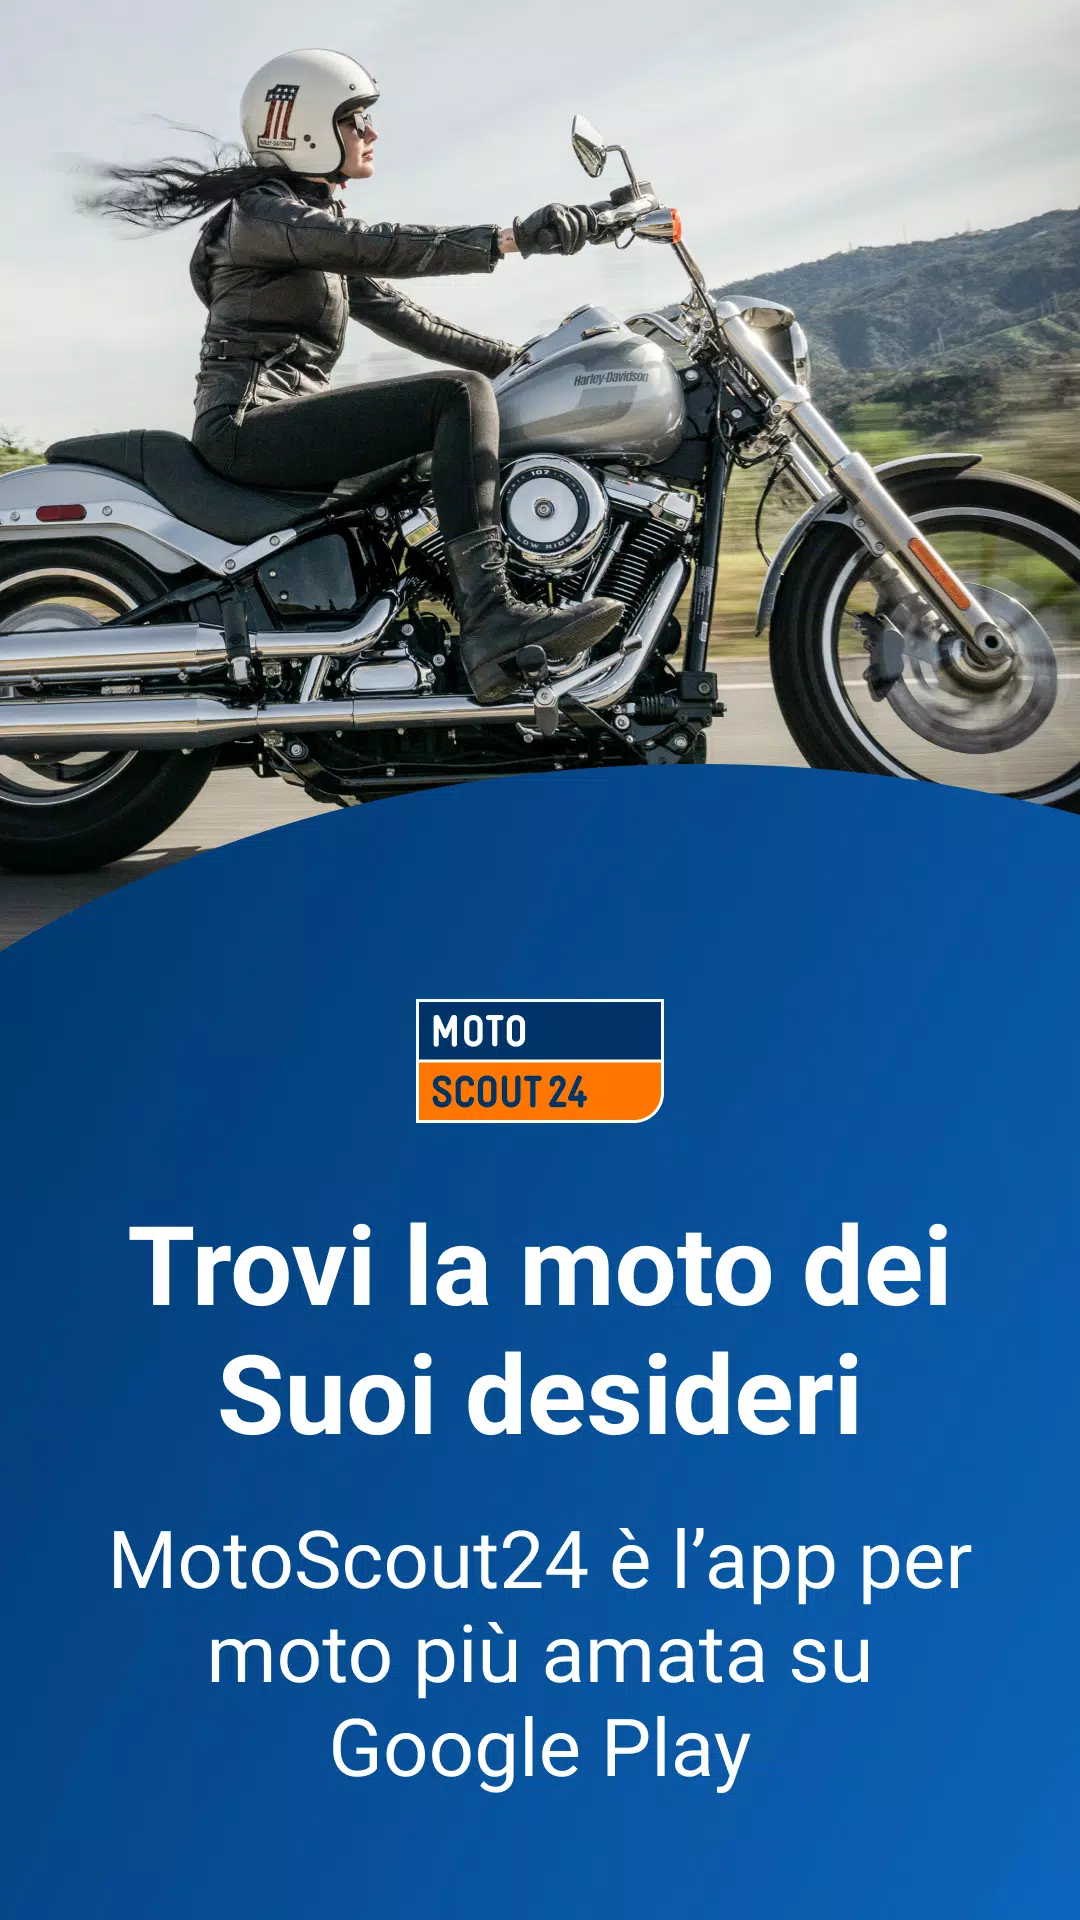 MotoScout24 for Android - APK Download